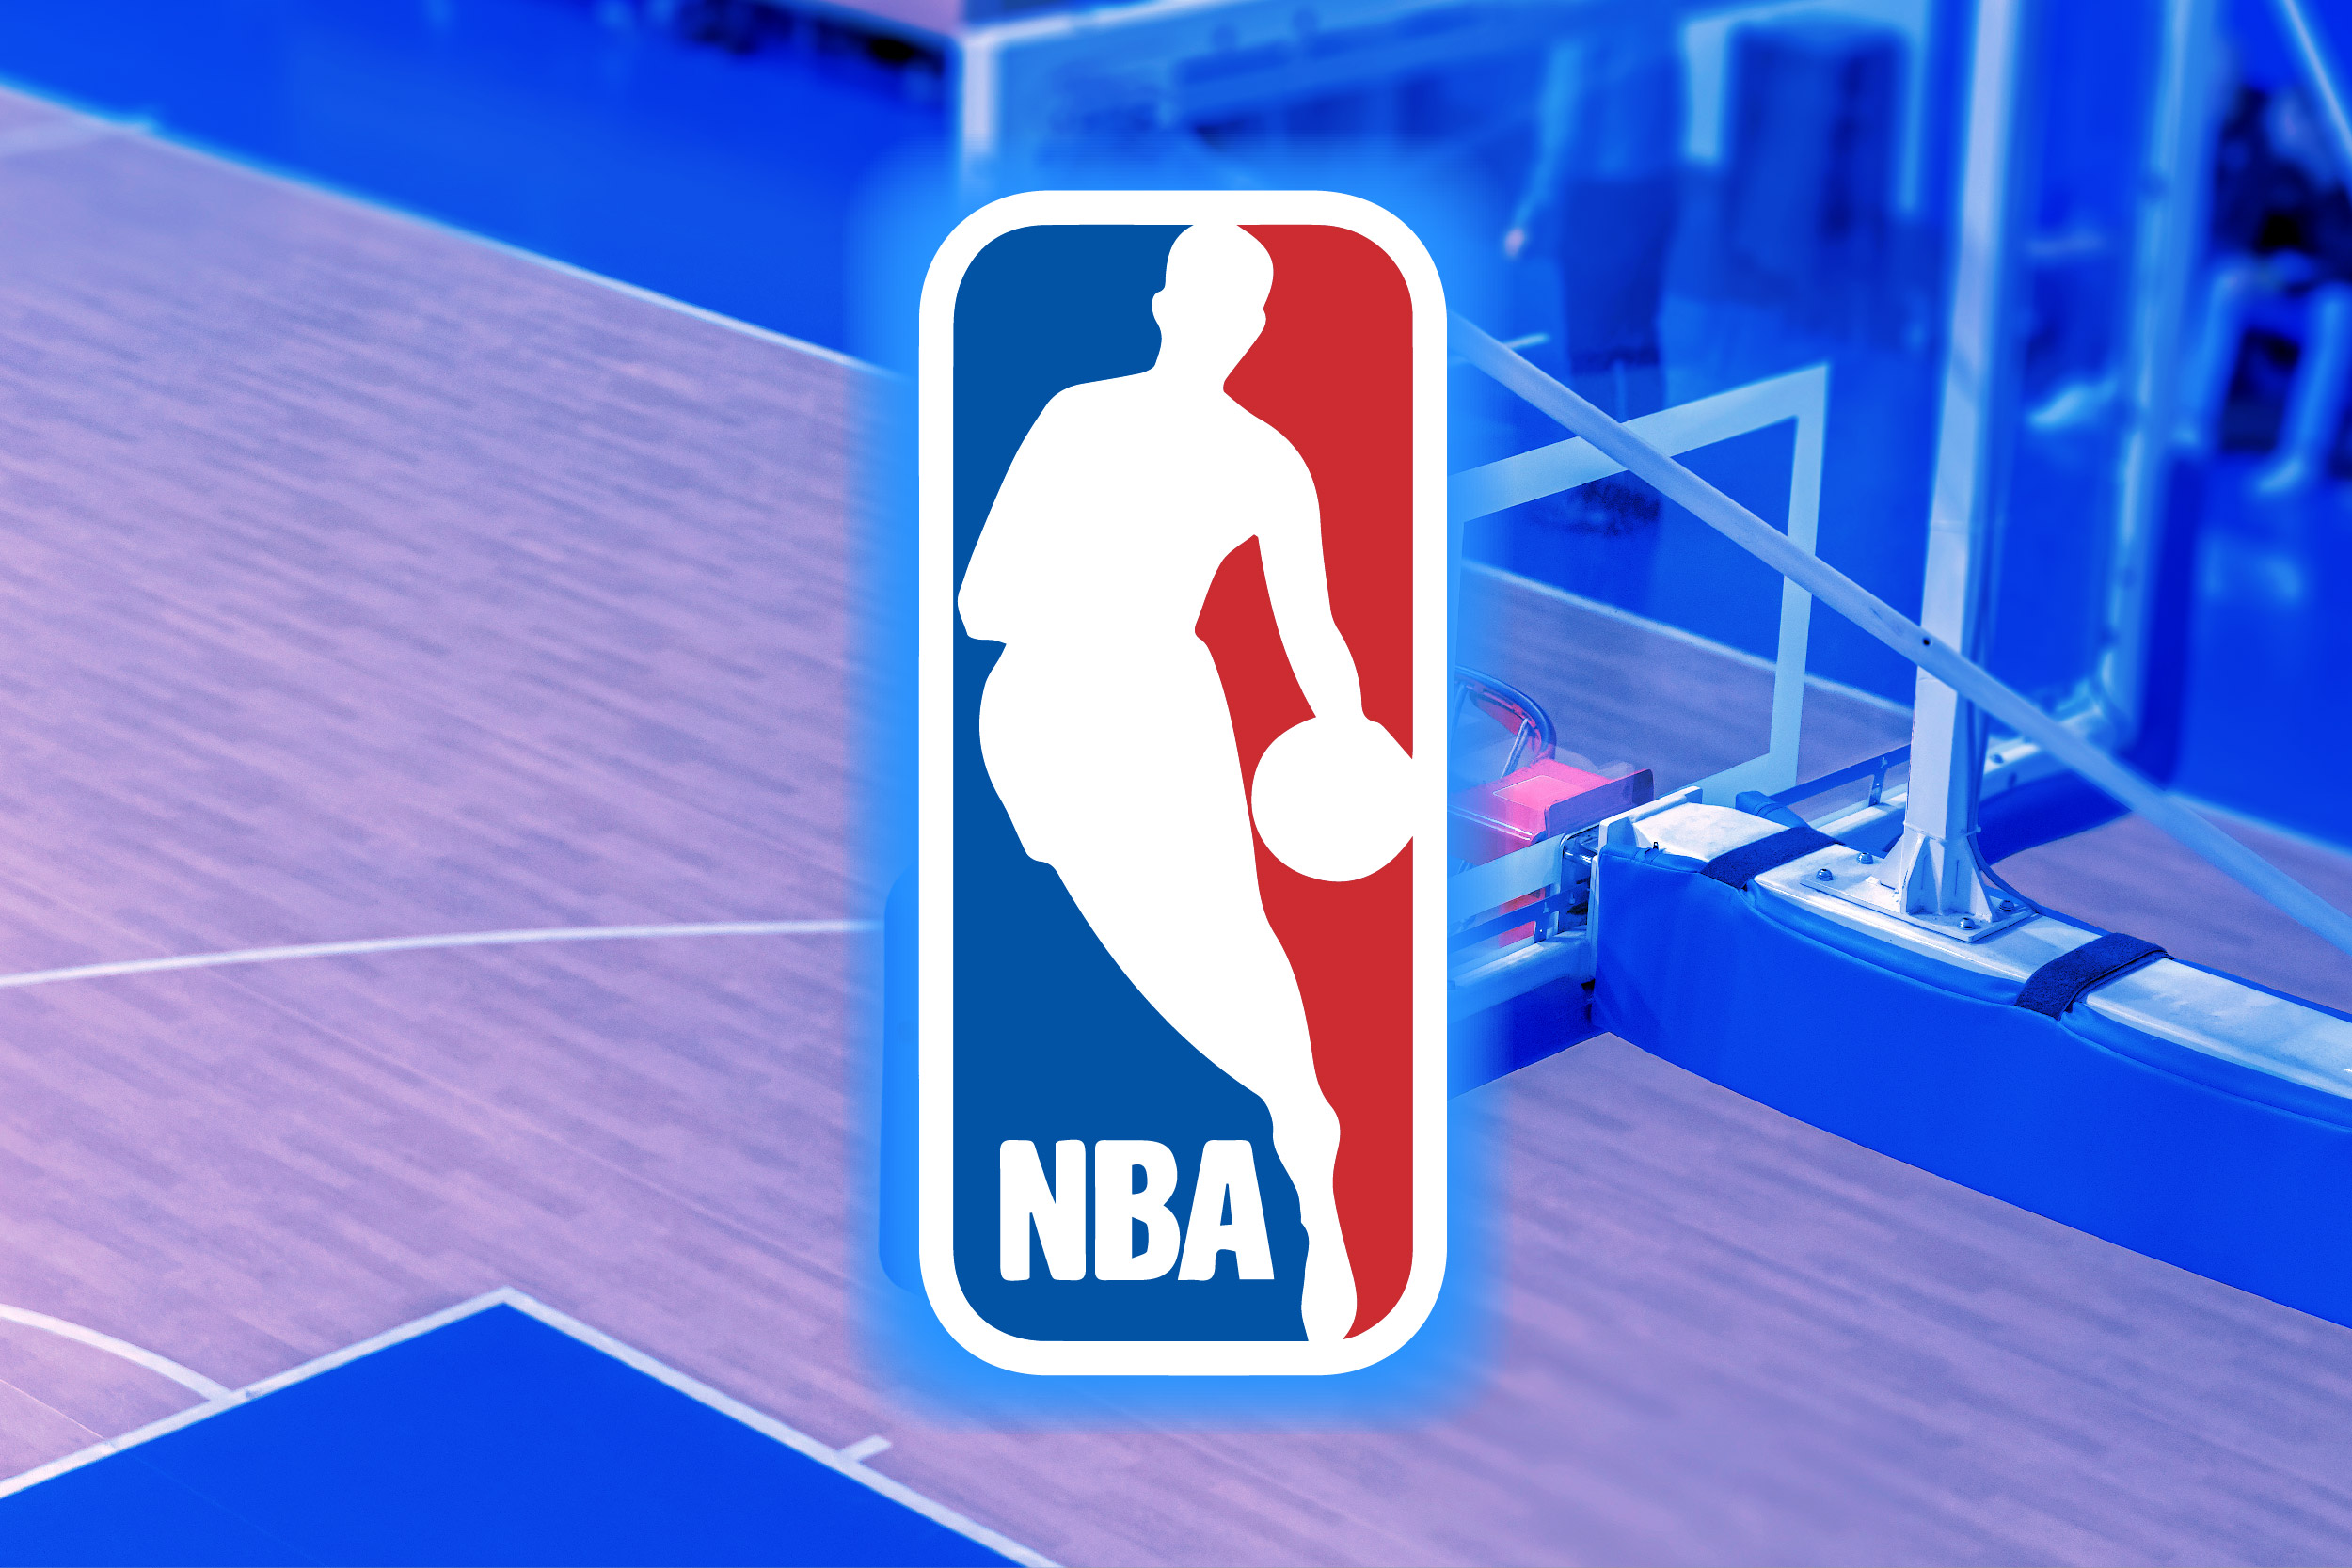 NBA Suffers Data Breach that Exposes its Fans' Personal Information